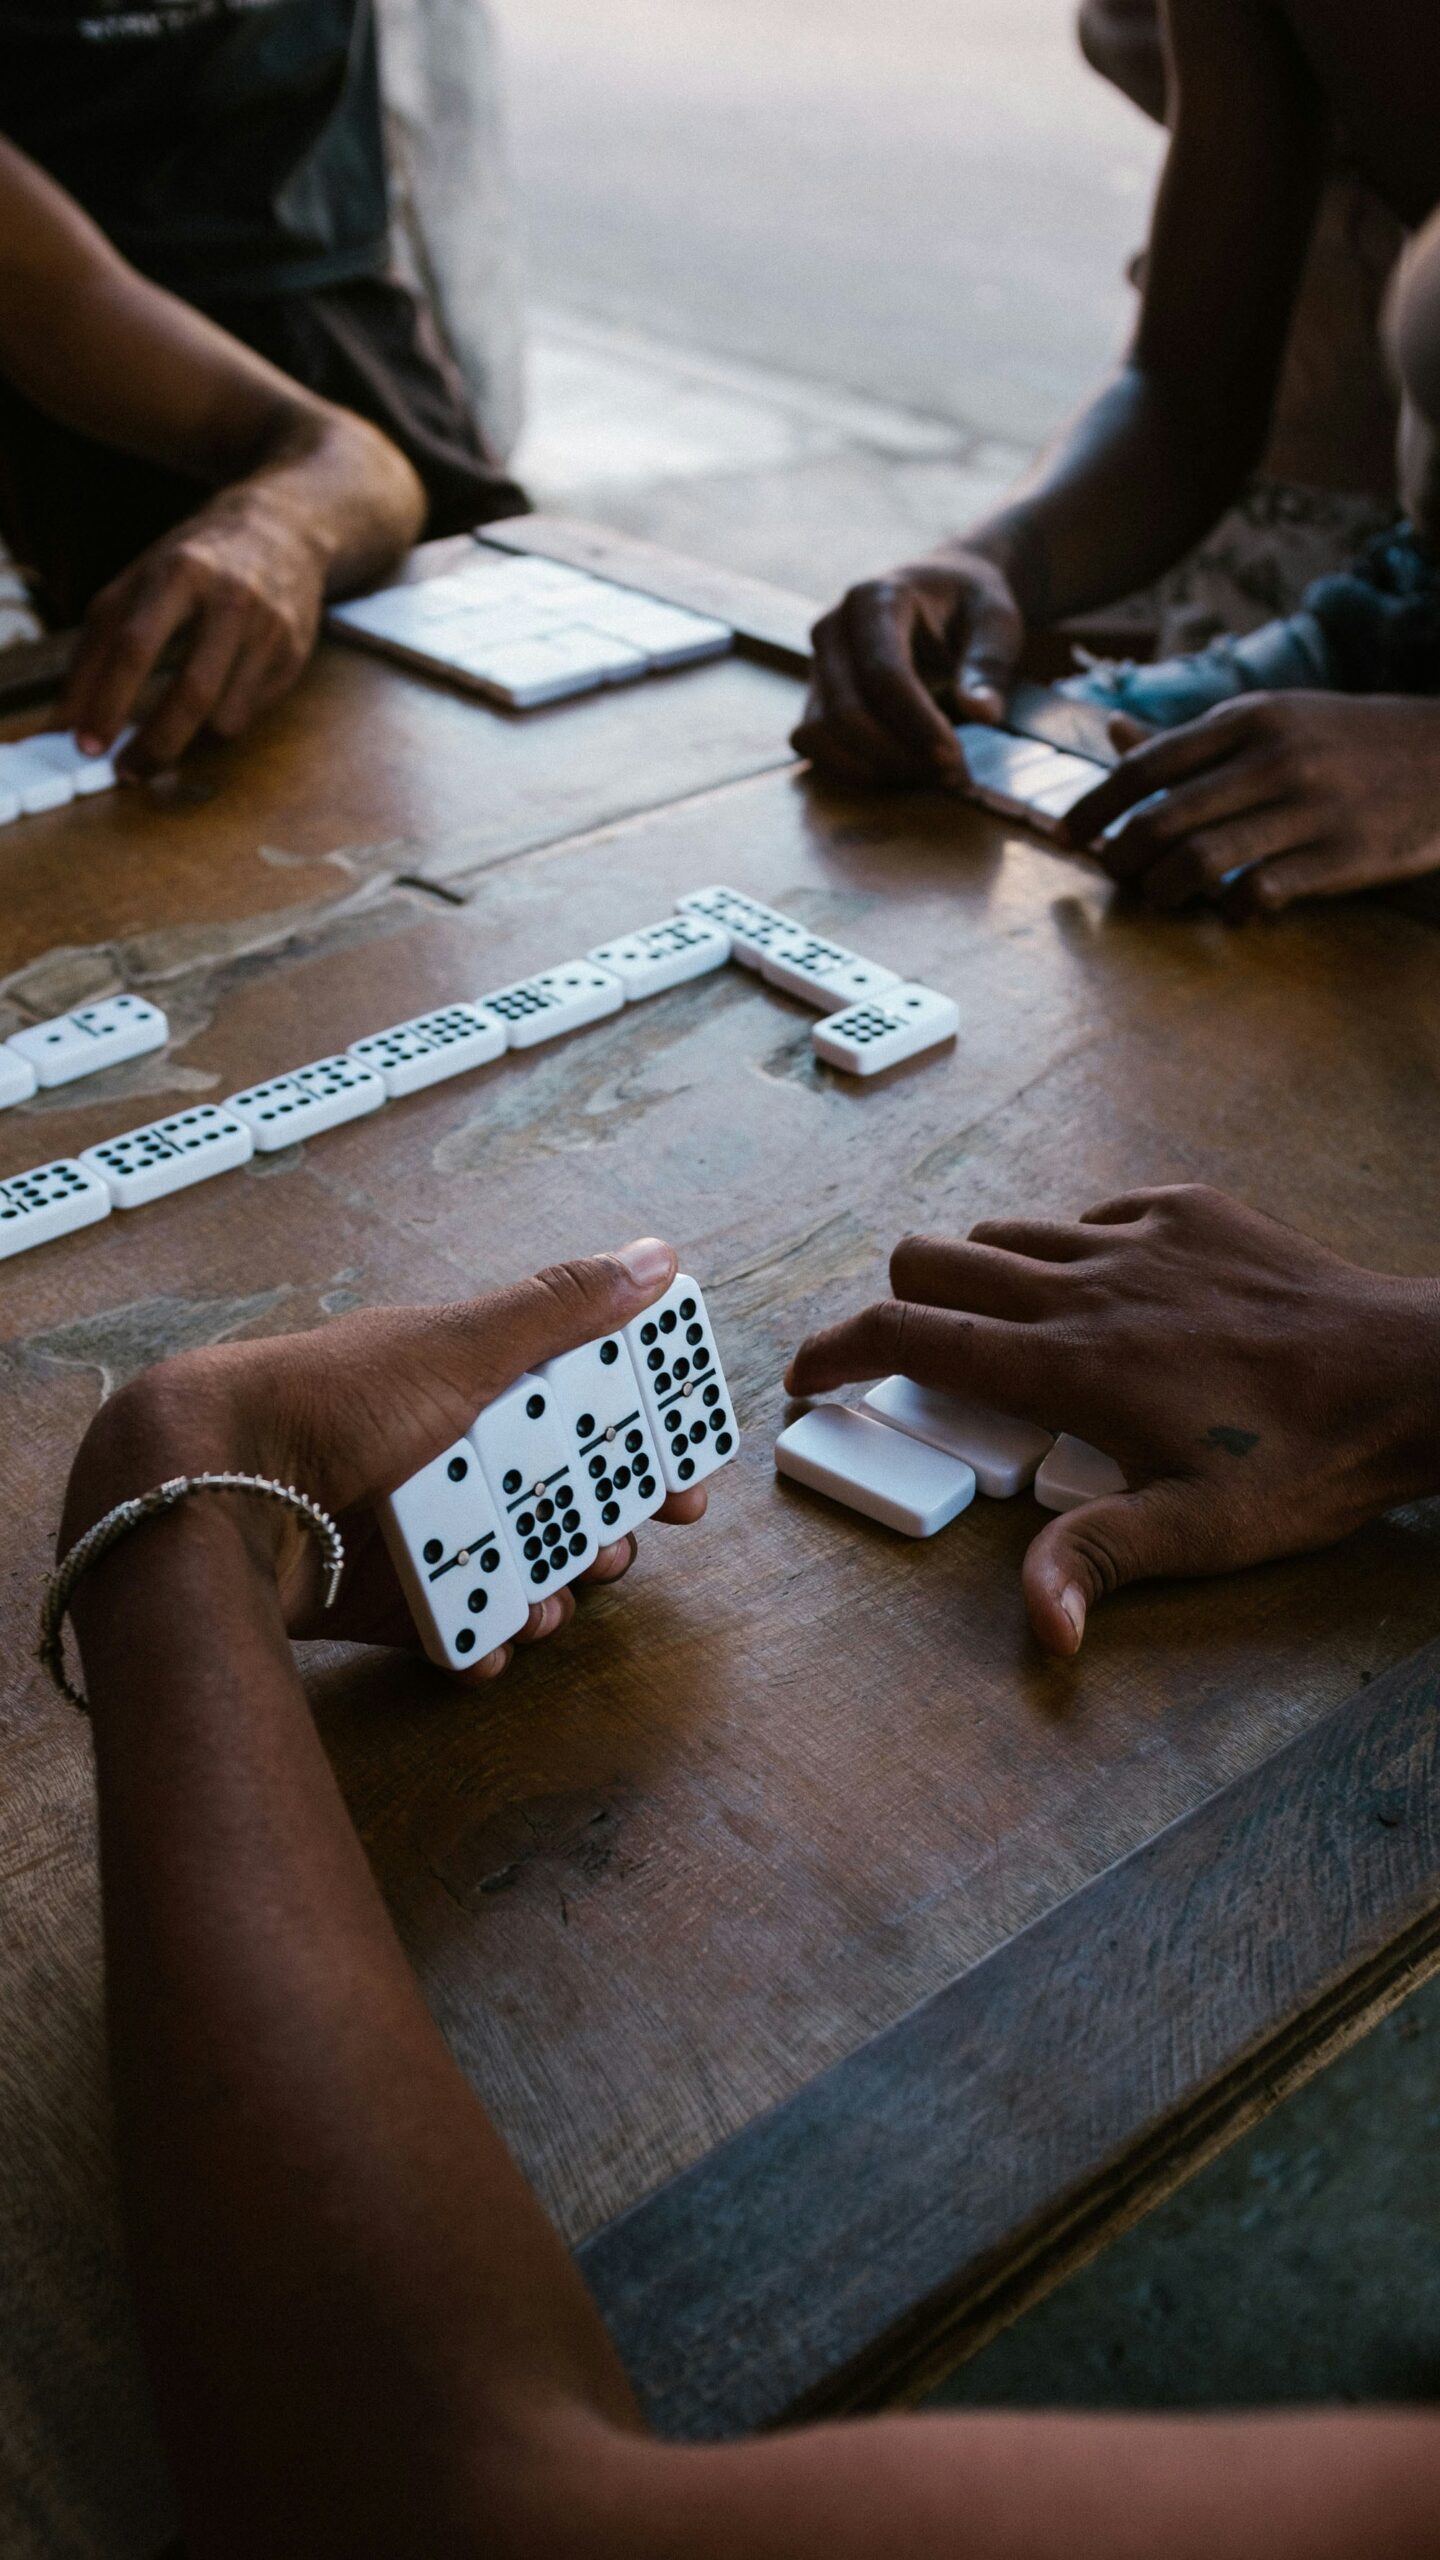 A group of people playing a game of dominoes.